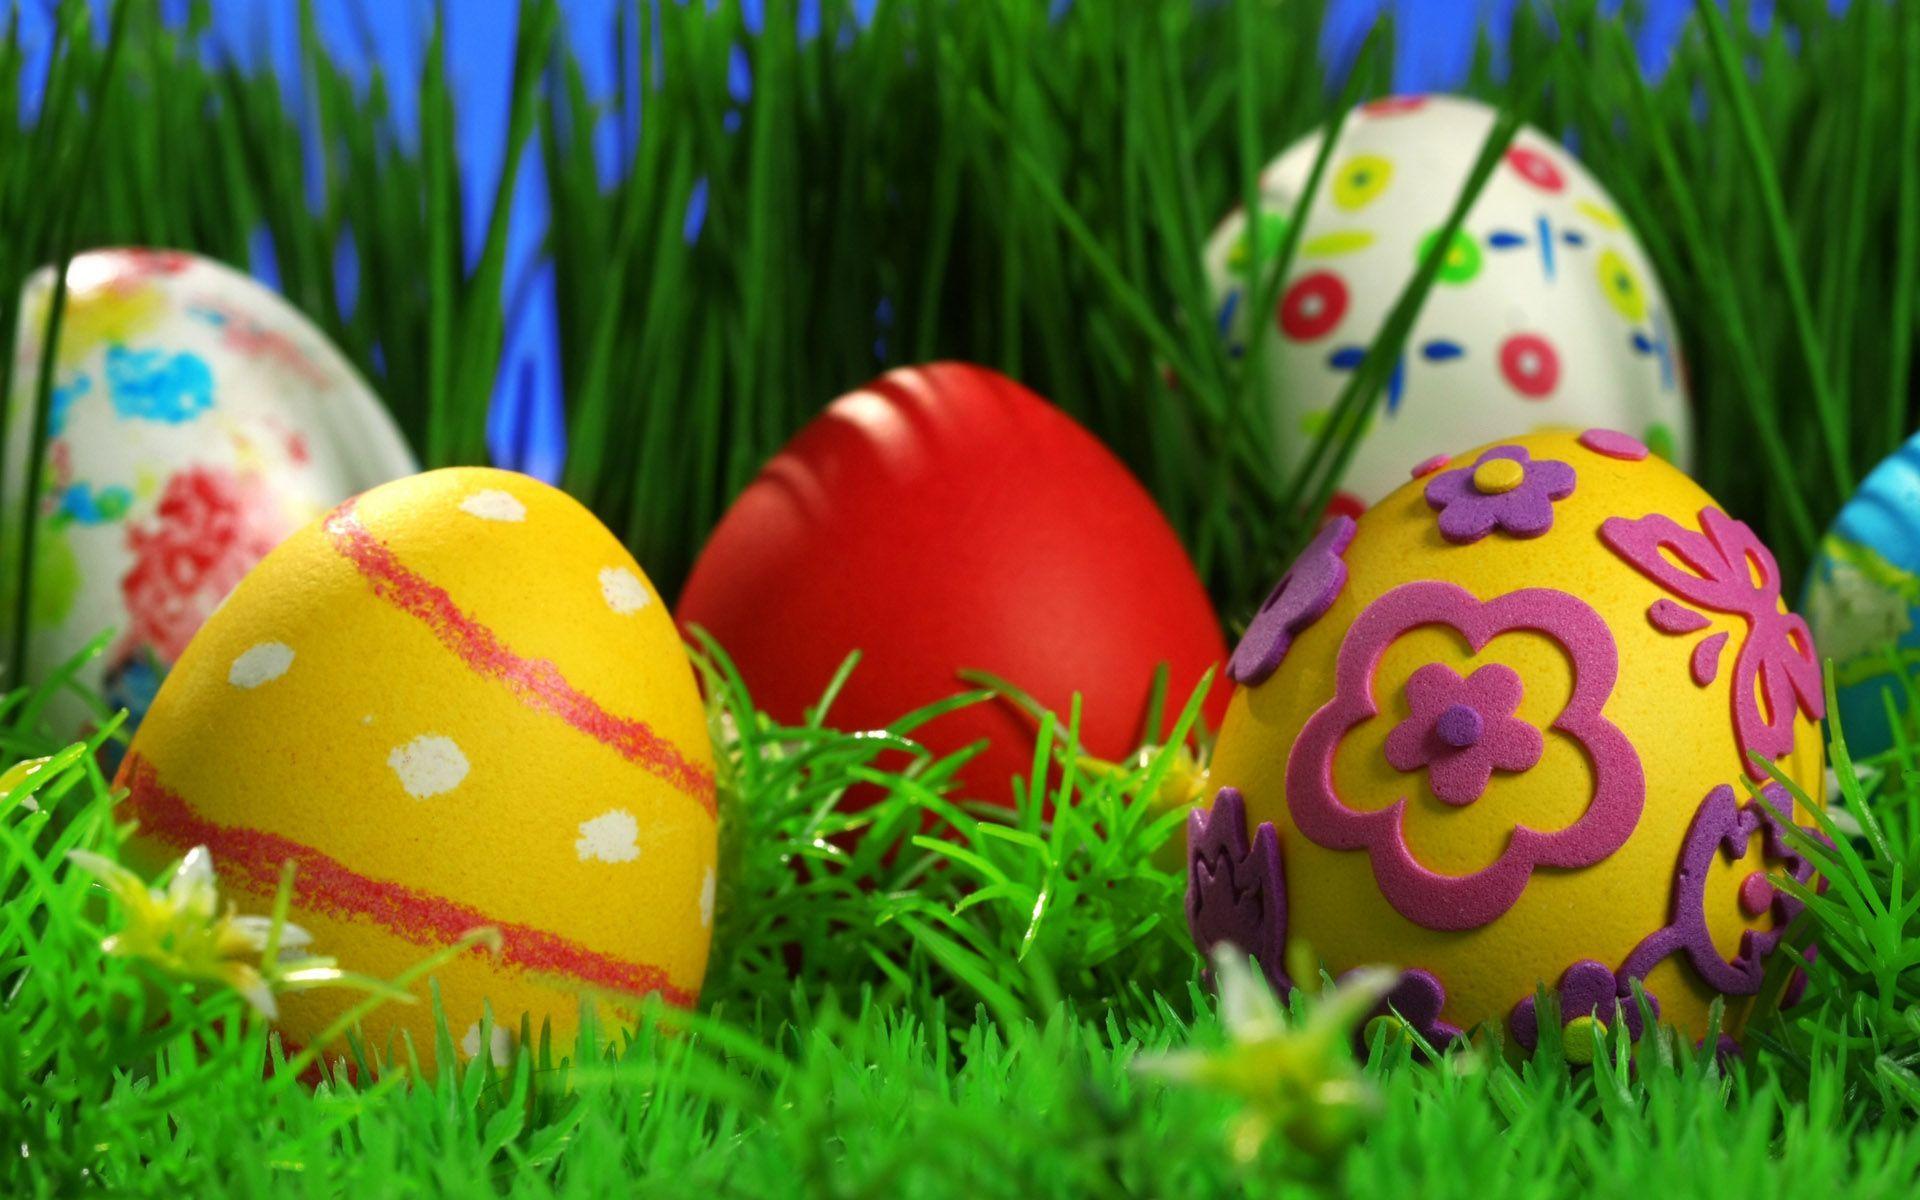 Happy Easter day 2014 Desktop Backgrounds and Download free Happy